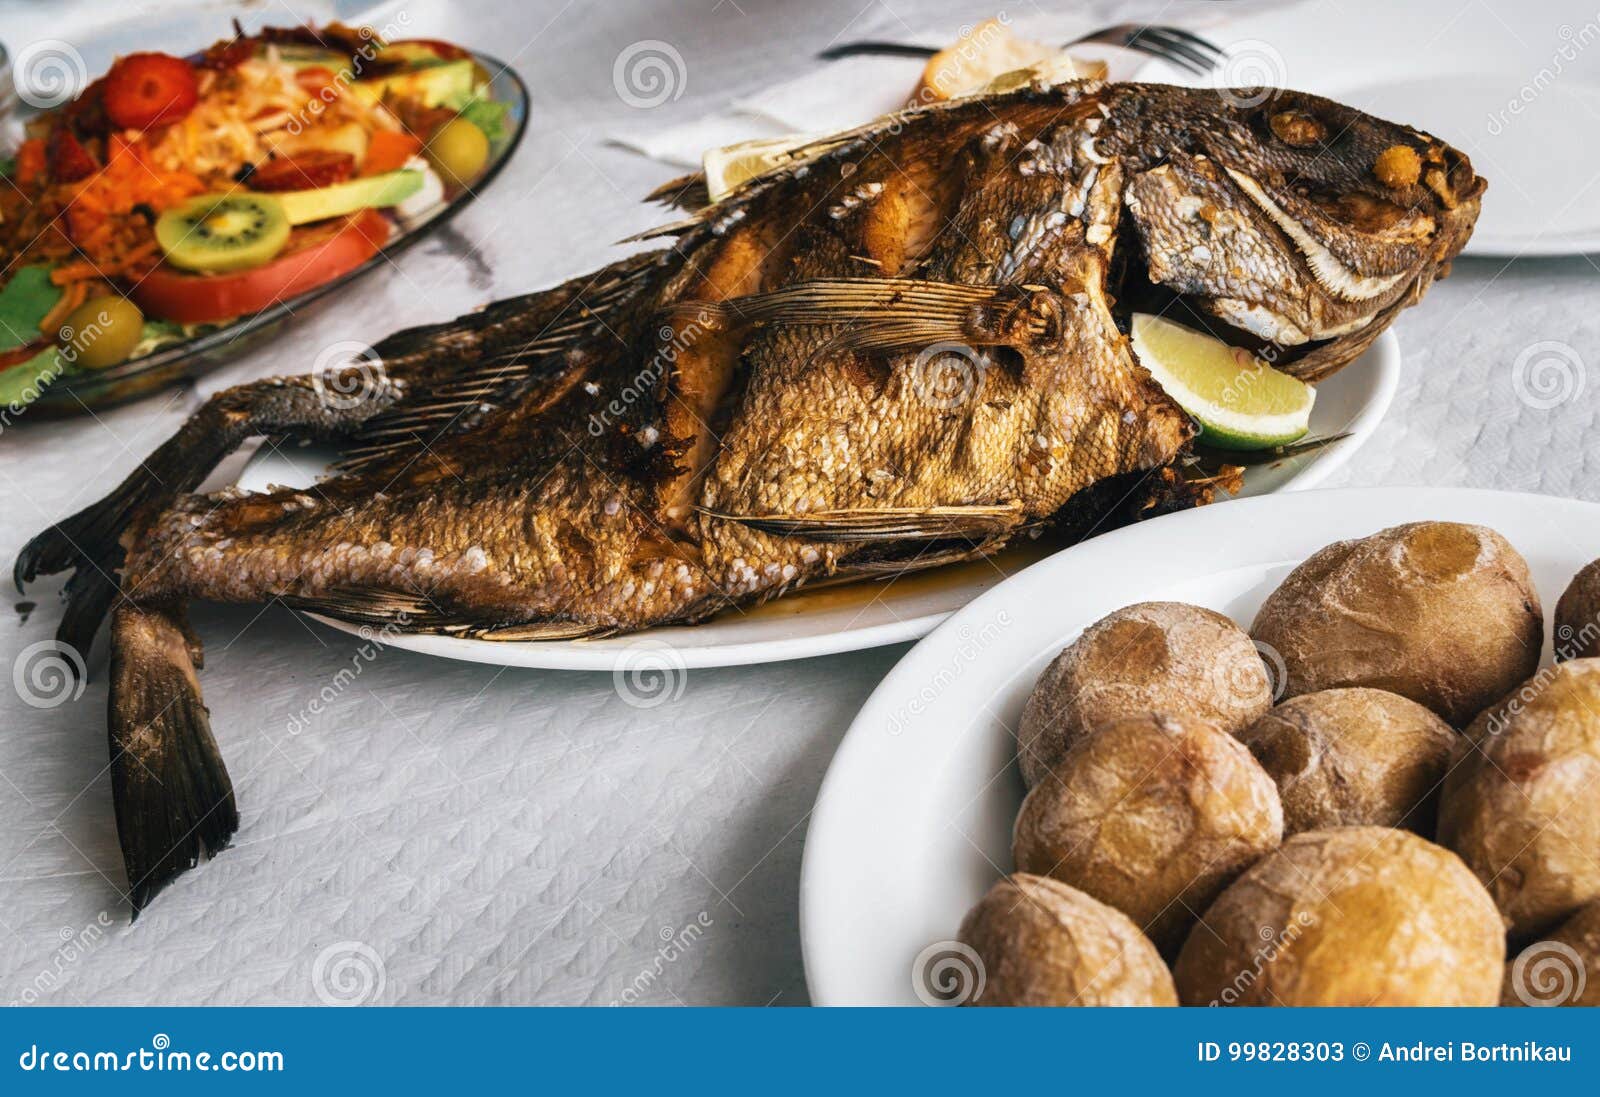 grilled fish and canarian potatoes in canary islands